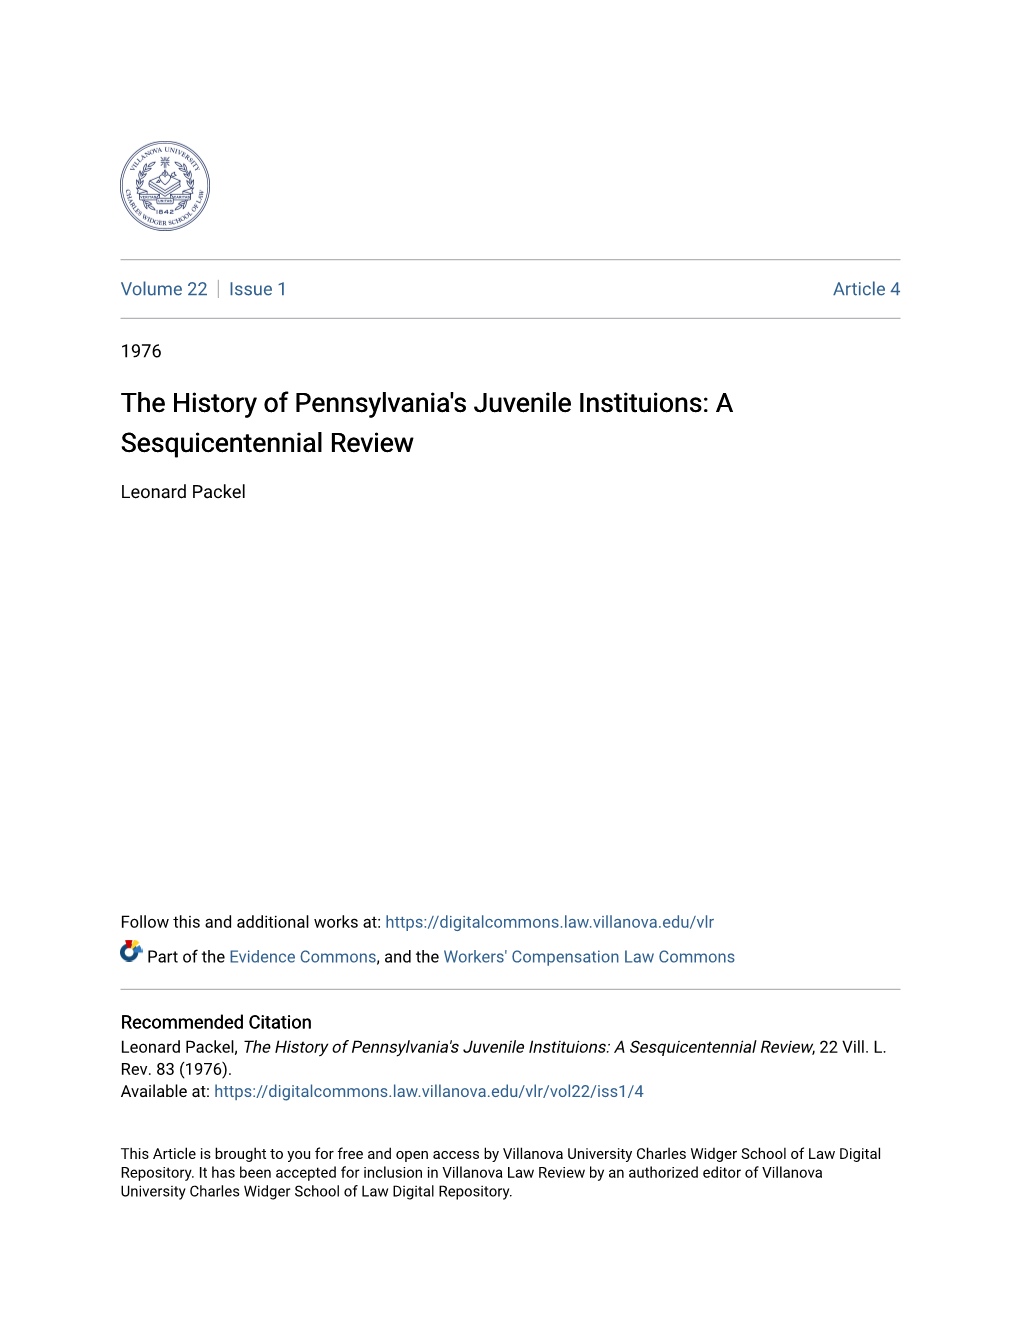 The History of Pennsylvania's Juvenile Instituions: a Sesquicentennial Review